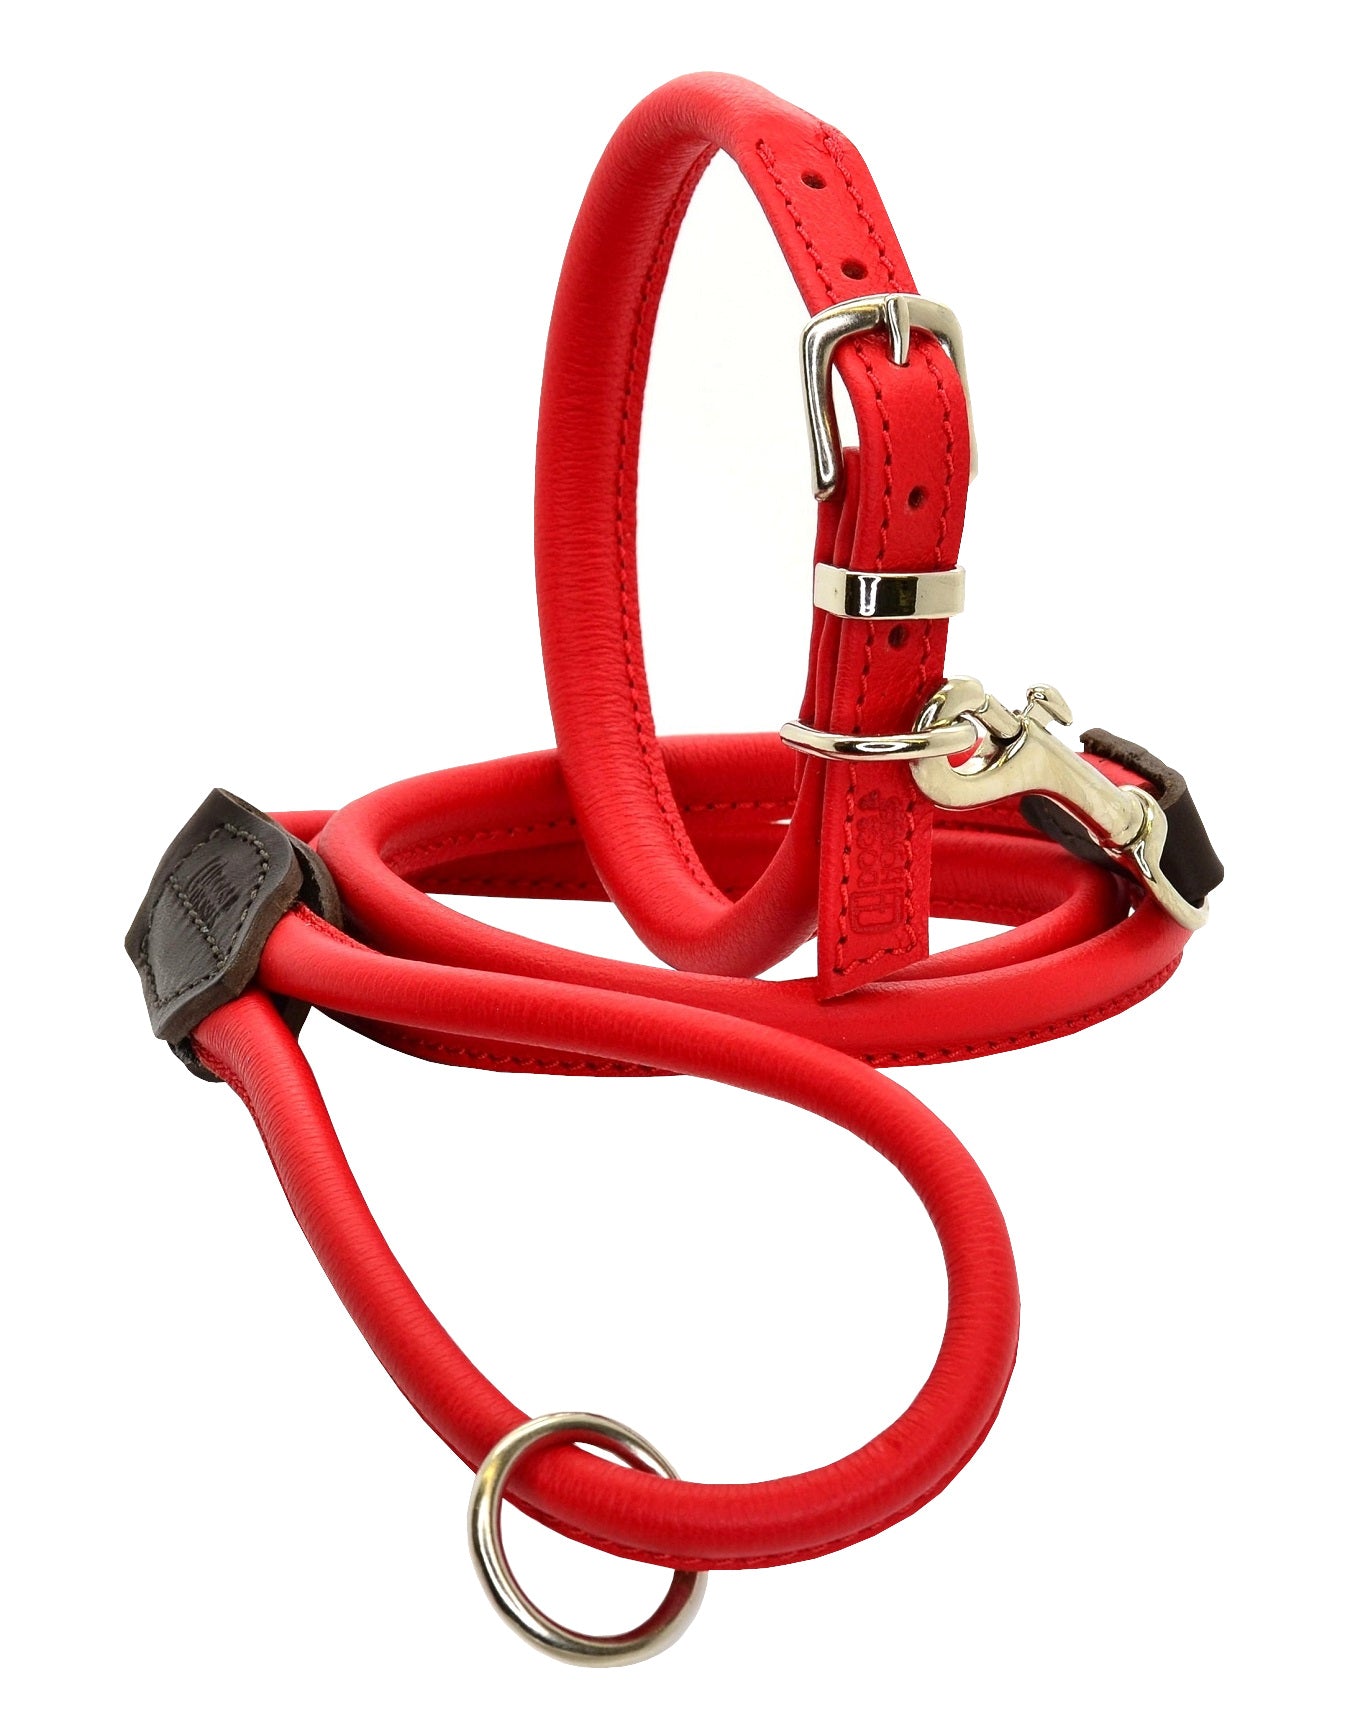 Rolled Soft Leather Dog Collar House Red